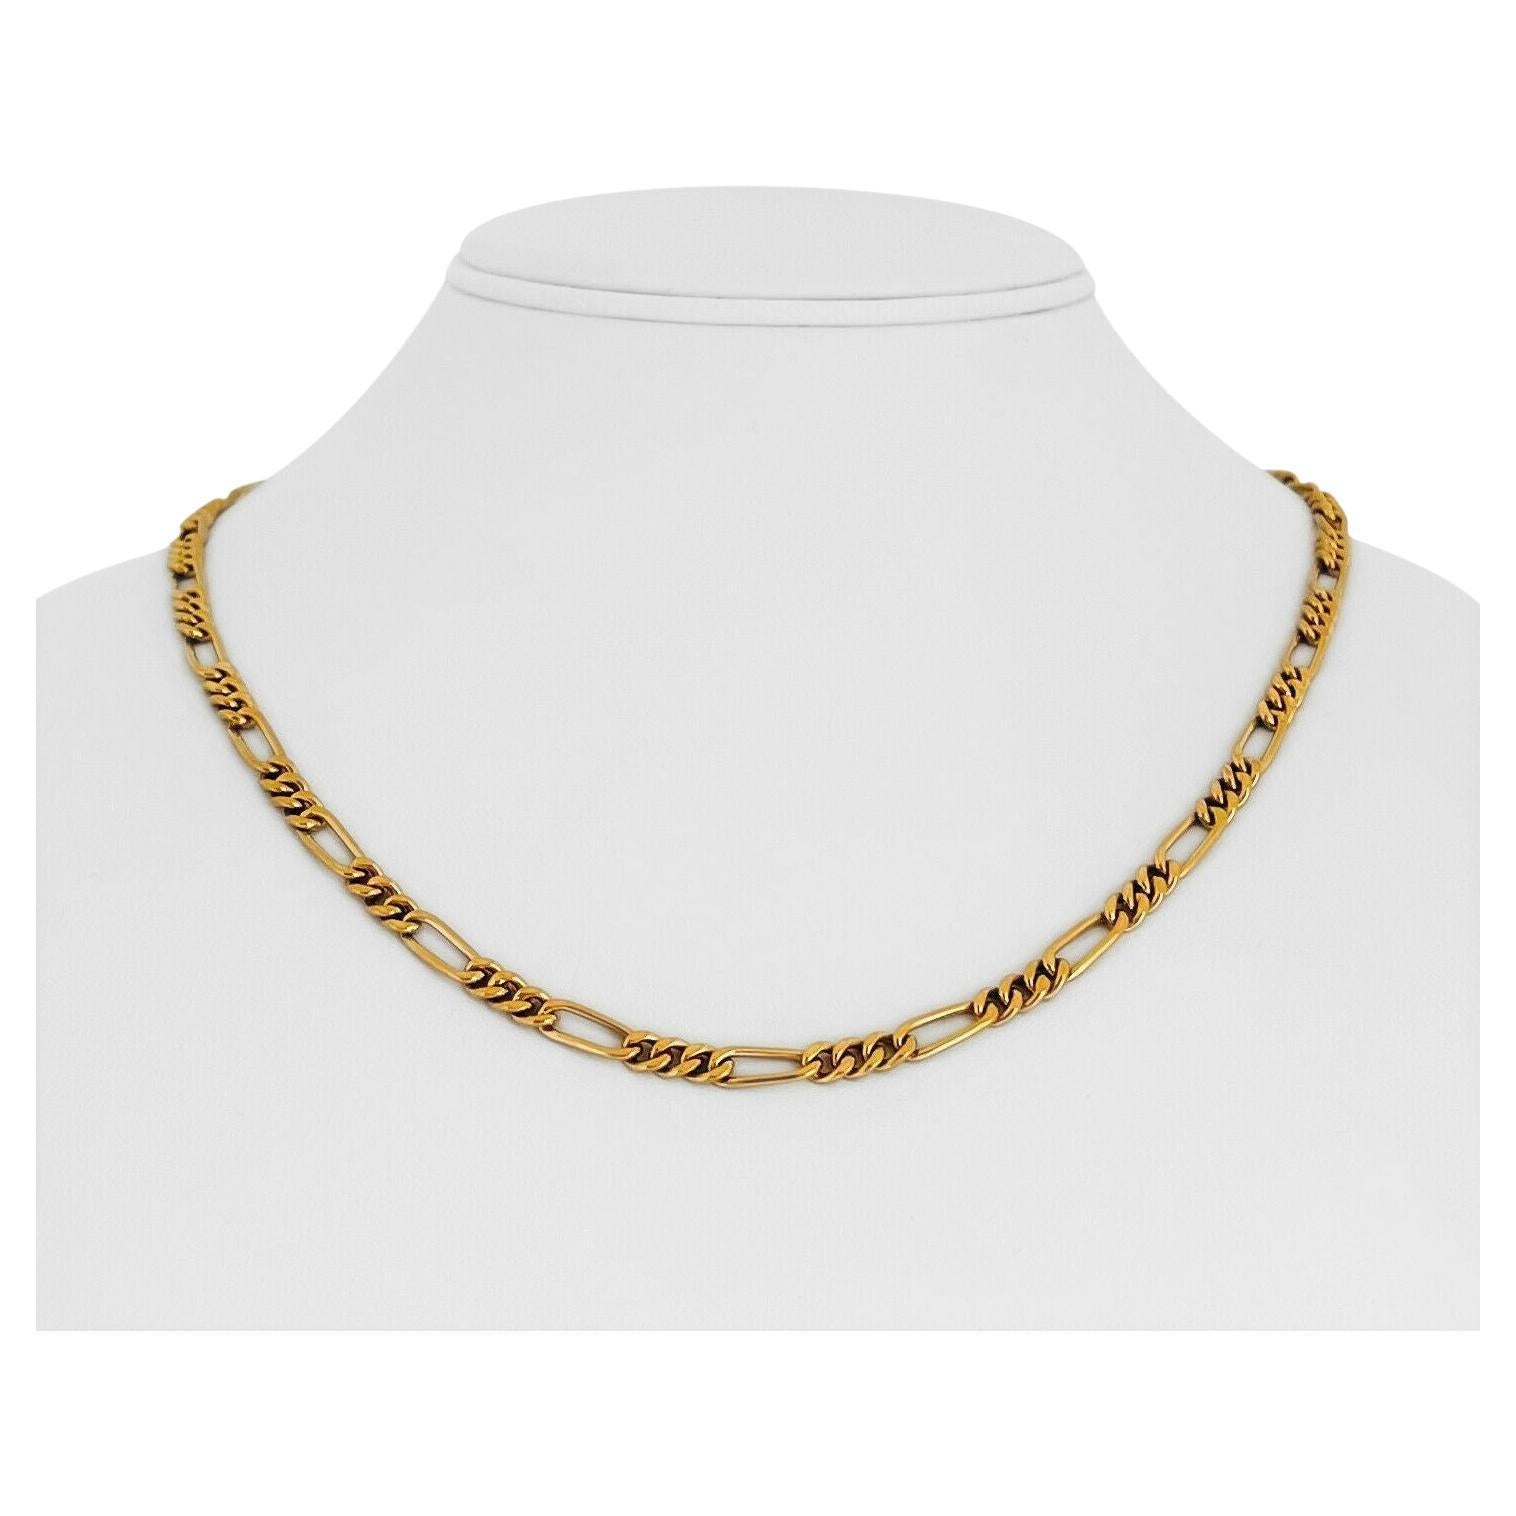 19 Karat Portuguese Yellow Gold Solid Figaro Link Chain Necklace 